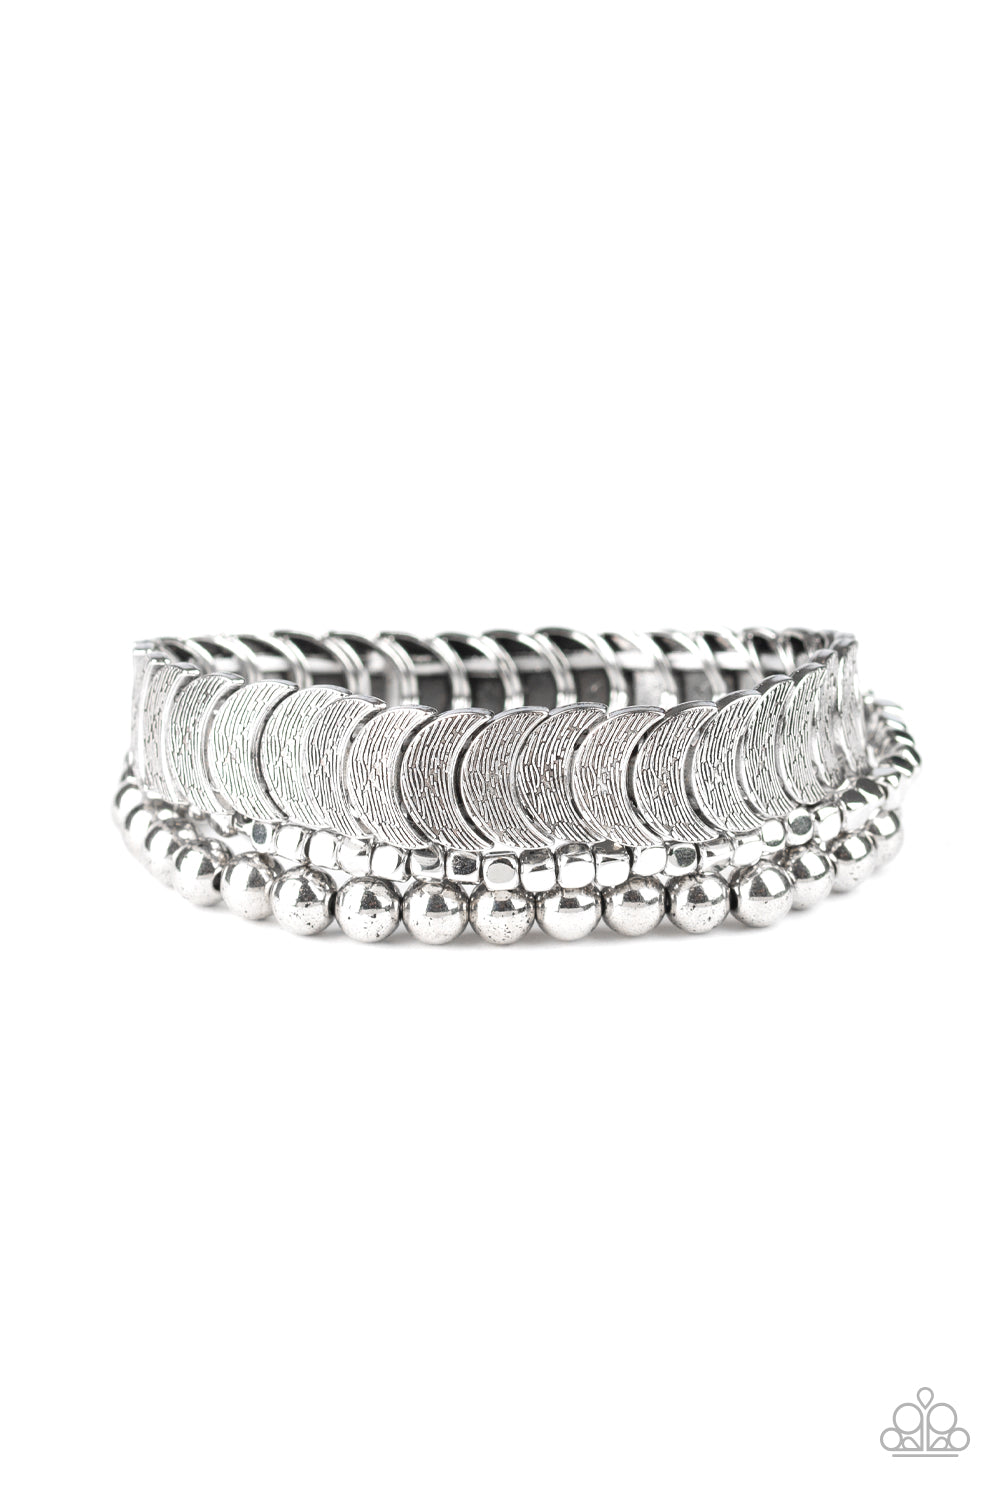 LAYER It On Me - Silver - VJ Bedazzled Jewelry